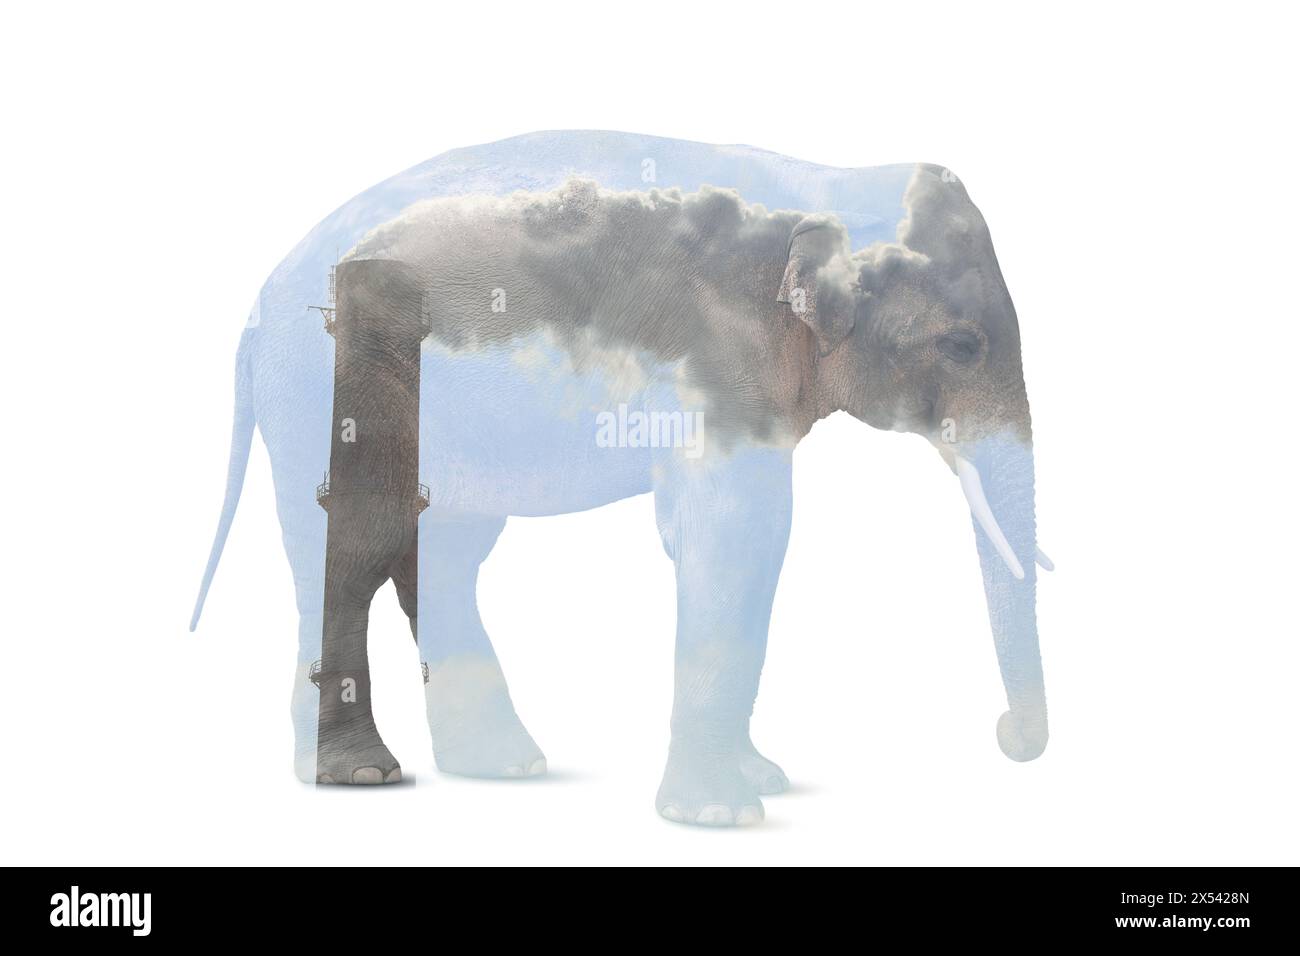 Double exposure of industrial chimney with smoke and elephant. Environmental pollution Stock Photo